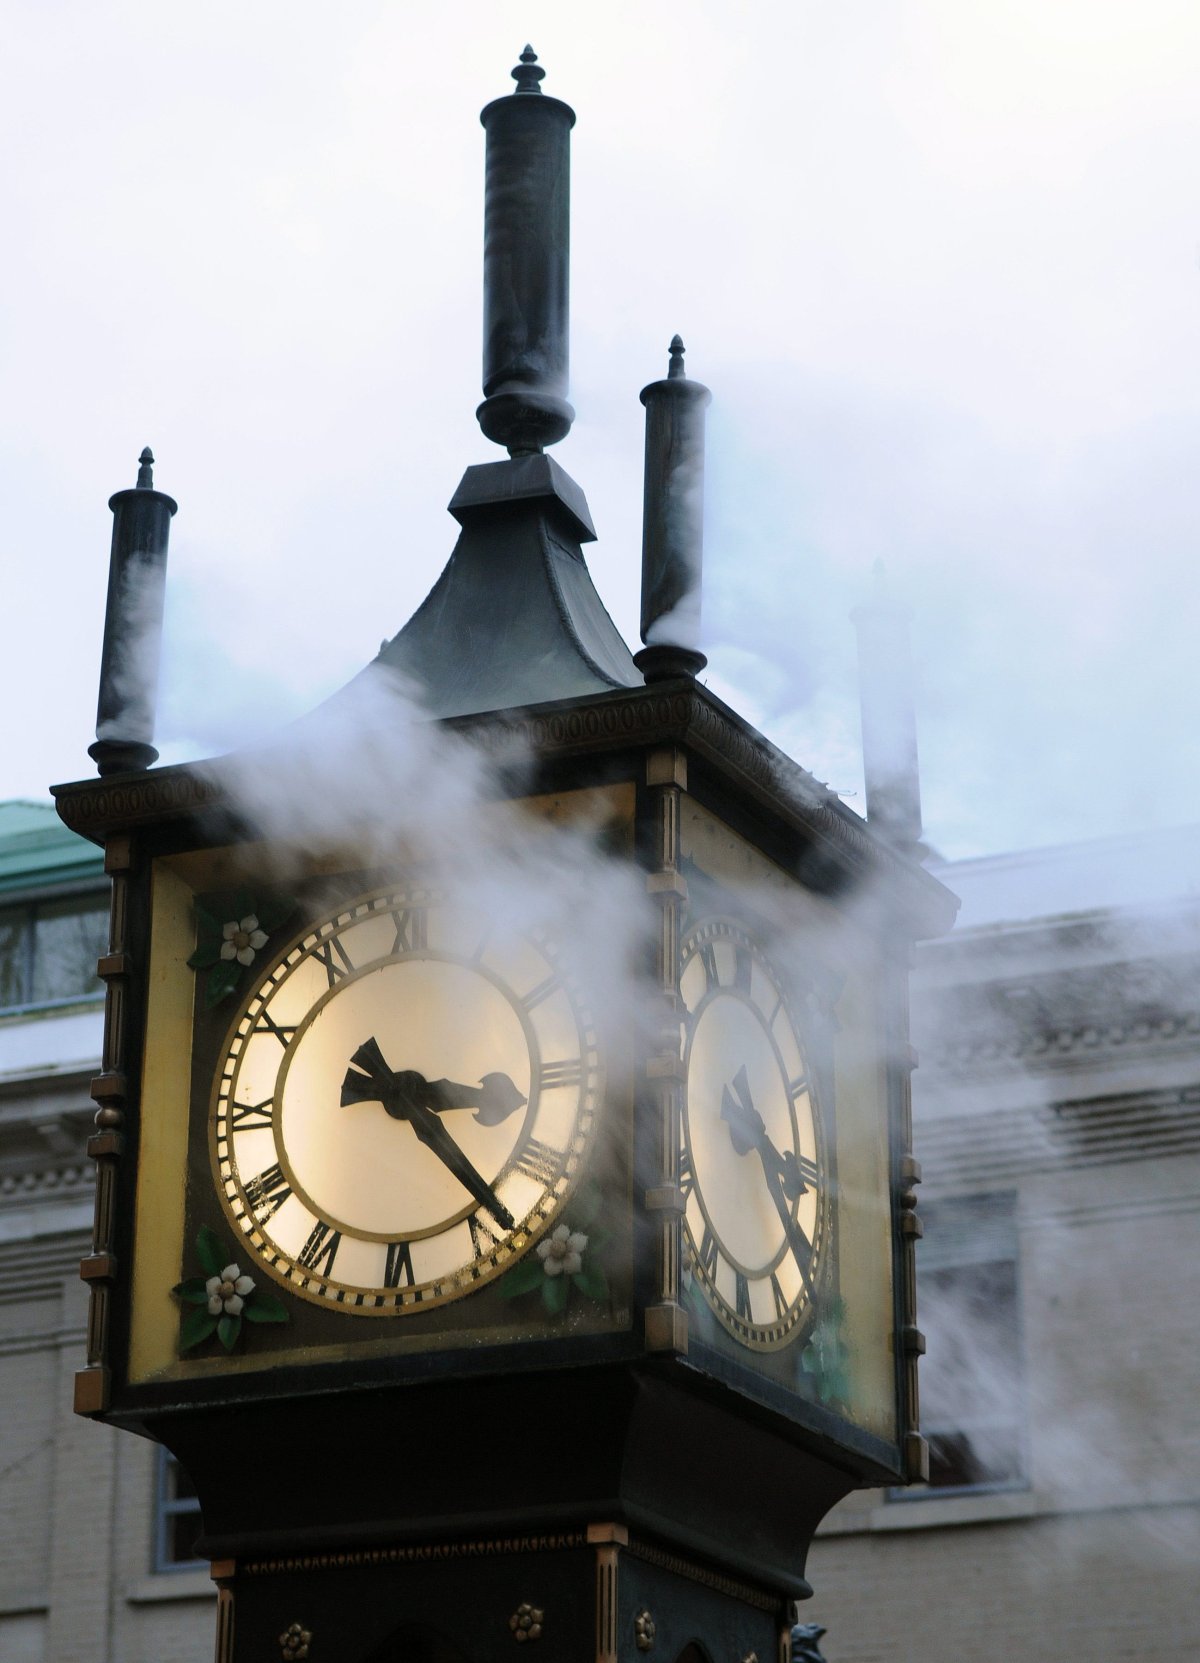 Gastown steam clock is getting some much-needed repairs.